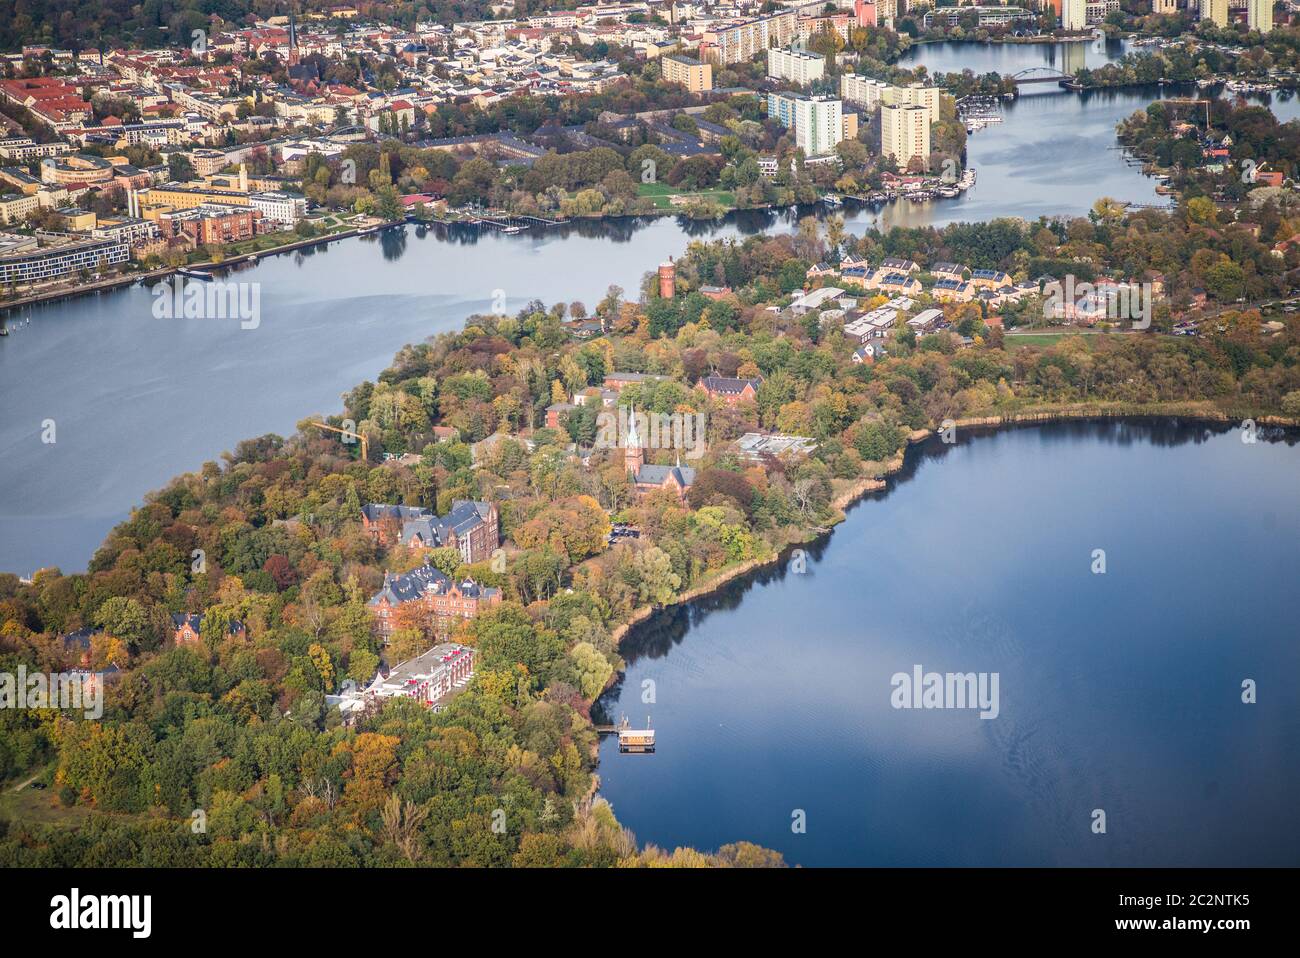 Potsdam, Germany, Peninsula Hermannswerder,  Templin suburb from city of Potsdam, (Templiner Vorstadt) surrounds by river Havel during early autumn Stock Photo